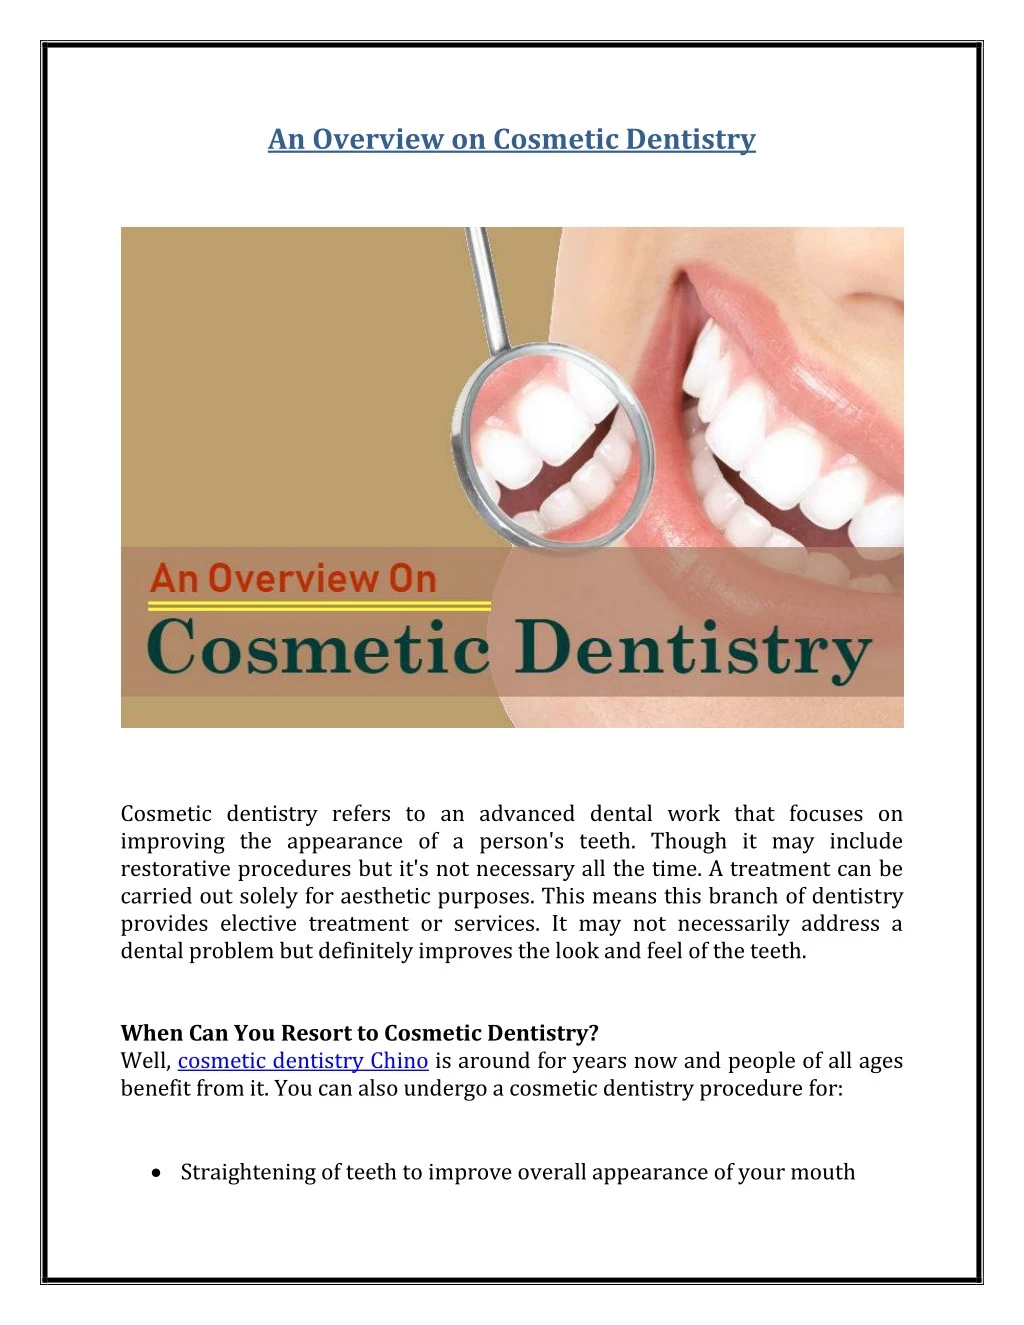 an overview on cosmetic dentistry